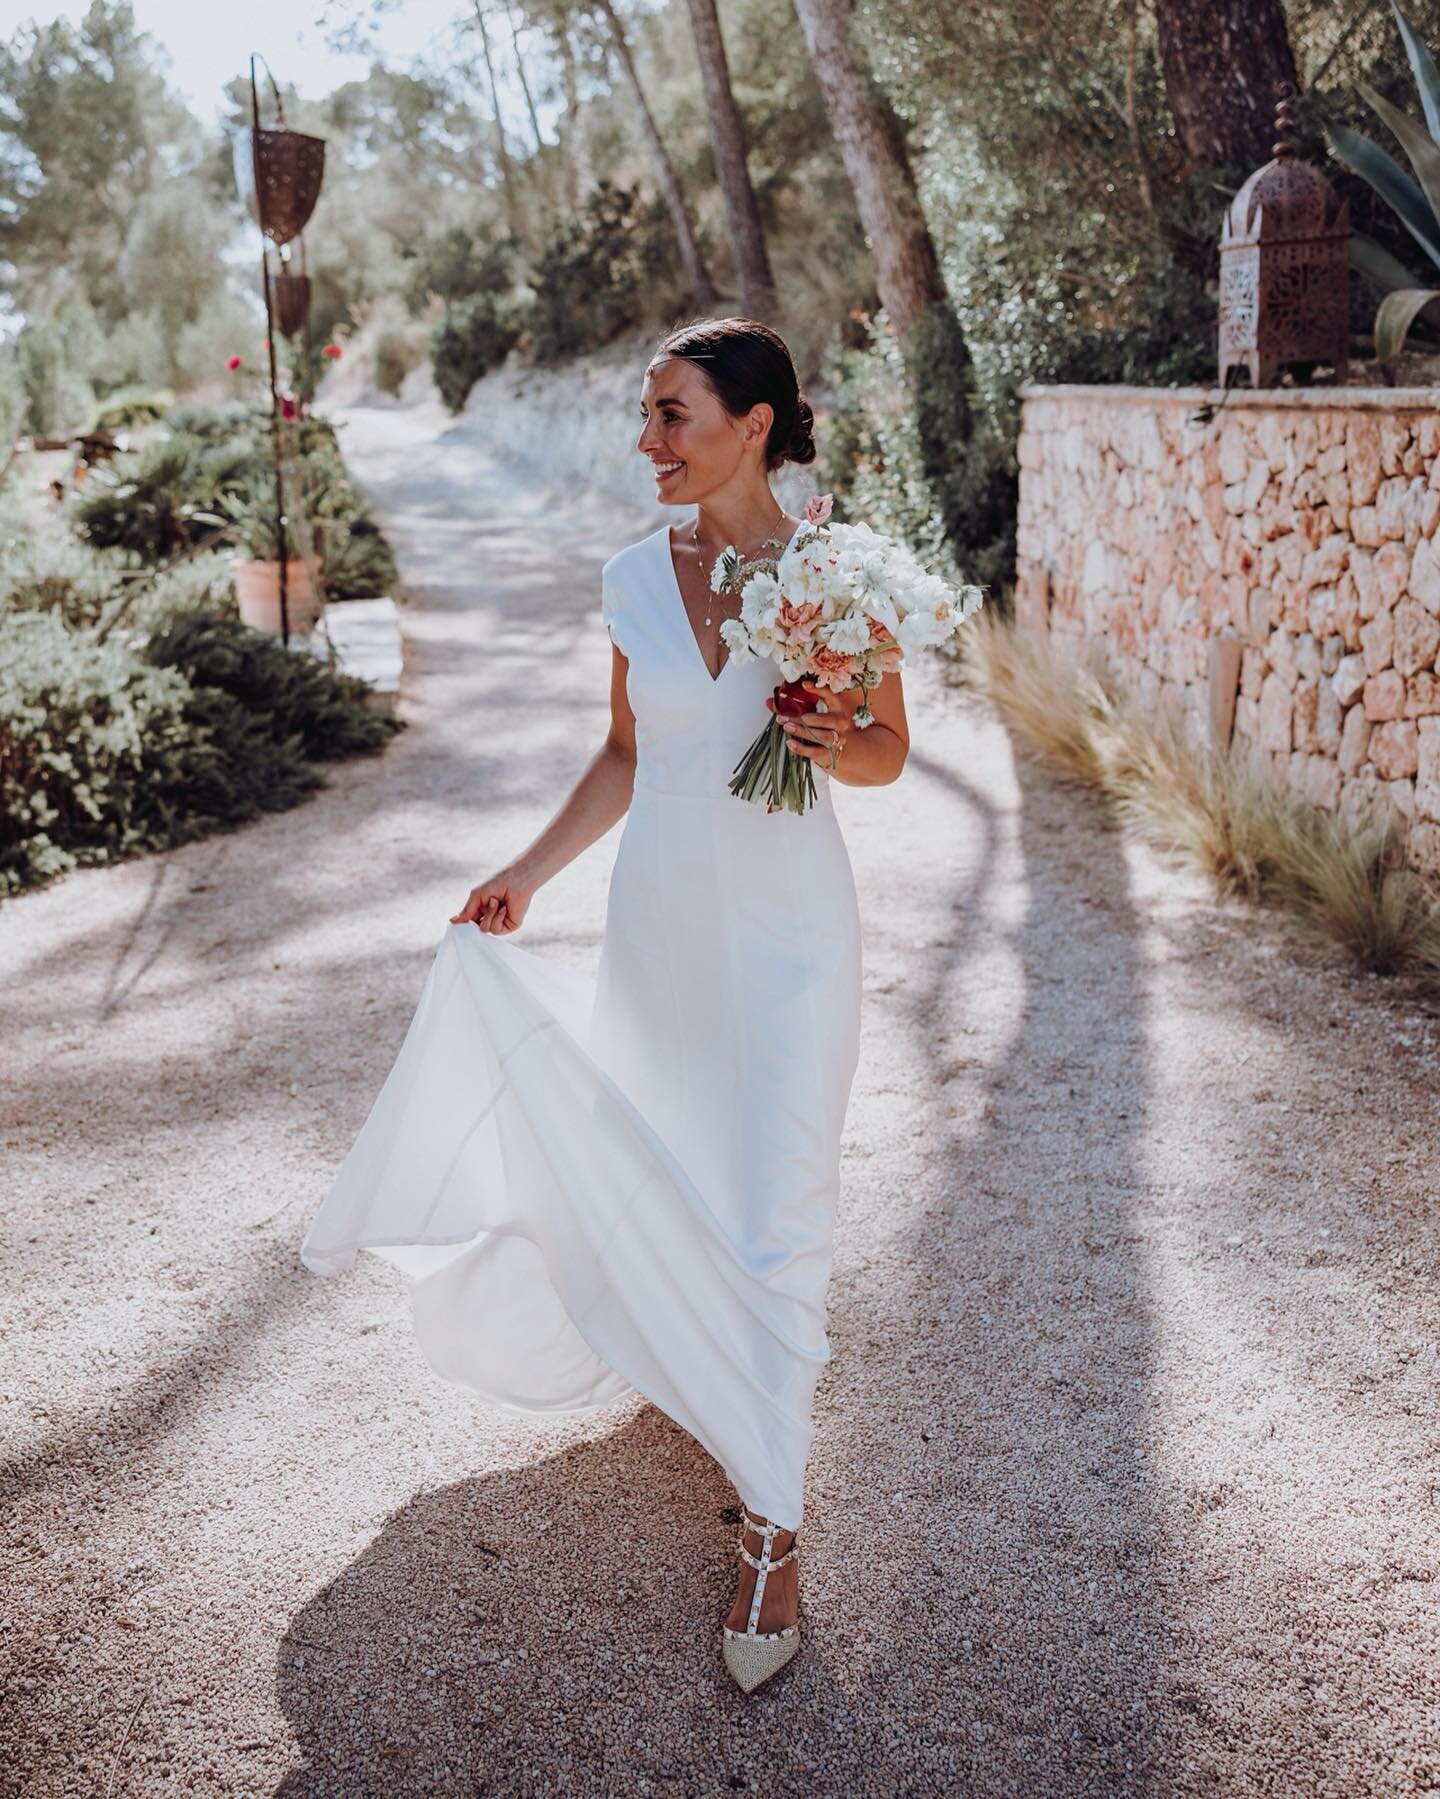 Couldn&rsquo;t be more happy to have met you Noemi and be a part of your special day! Stunning both inside and out. &hearts;️ And such a beautiful family! @noemivogtyoga
.
Photographer: @dominiclula_photography
Location: @osamajor_mallorca
Caterer: @